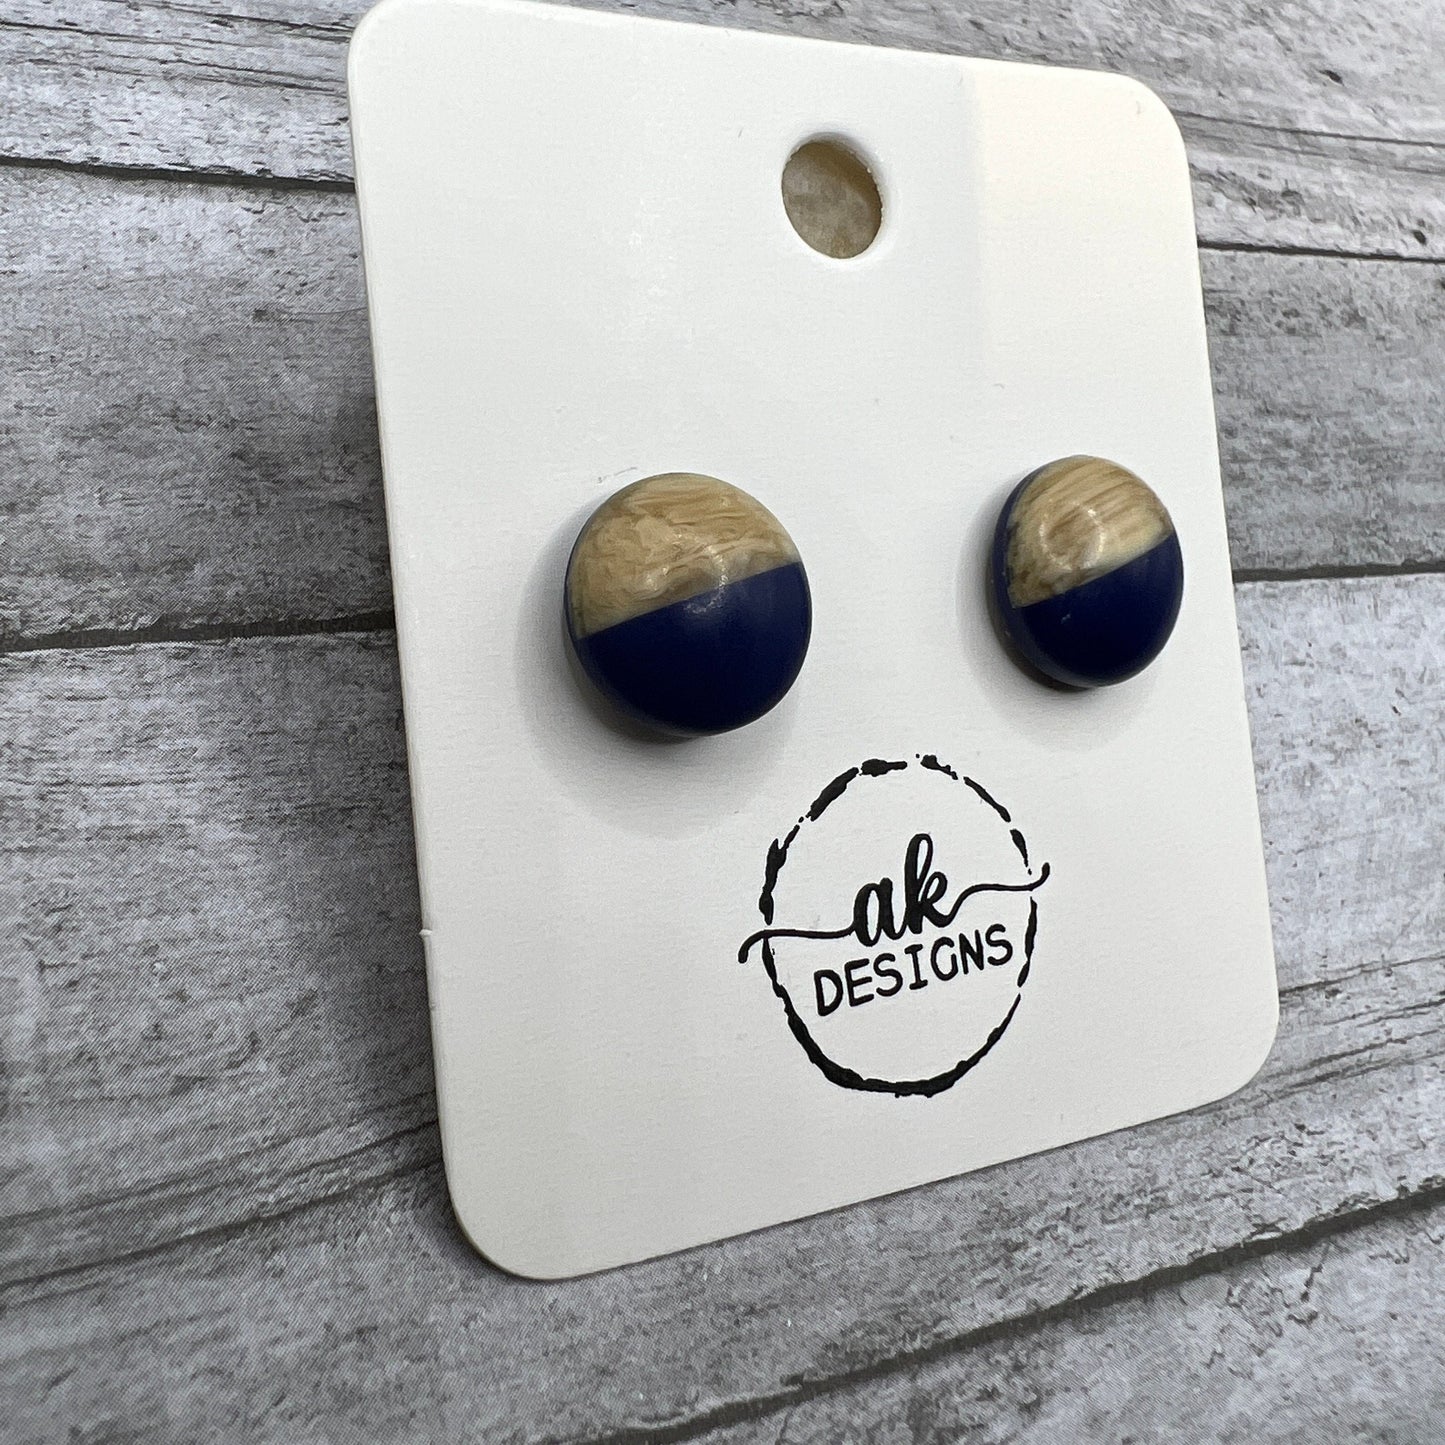 Navy Cabochon Resin and Wood Stud Earrings - Clearance